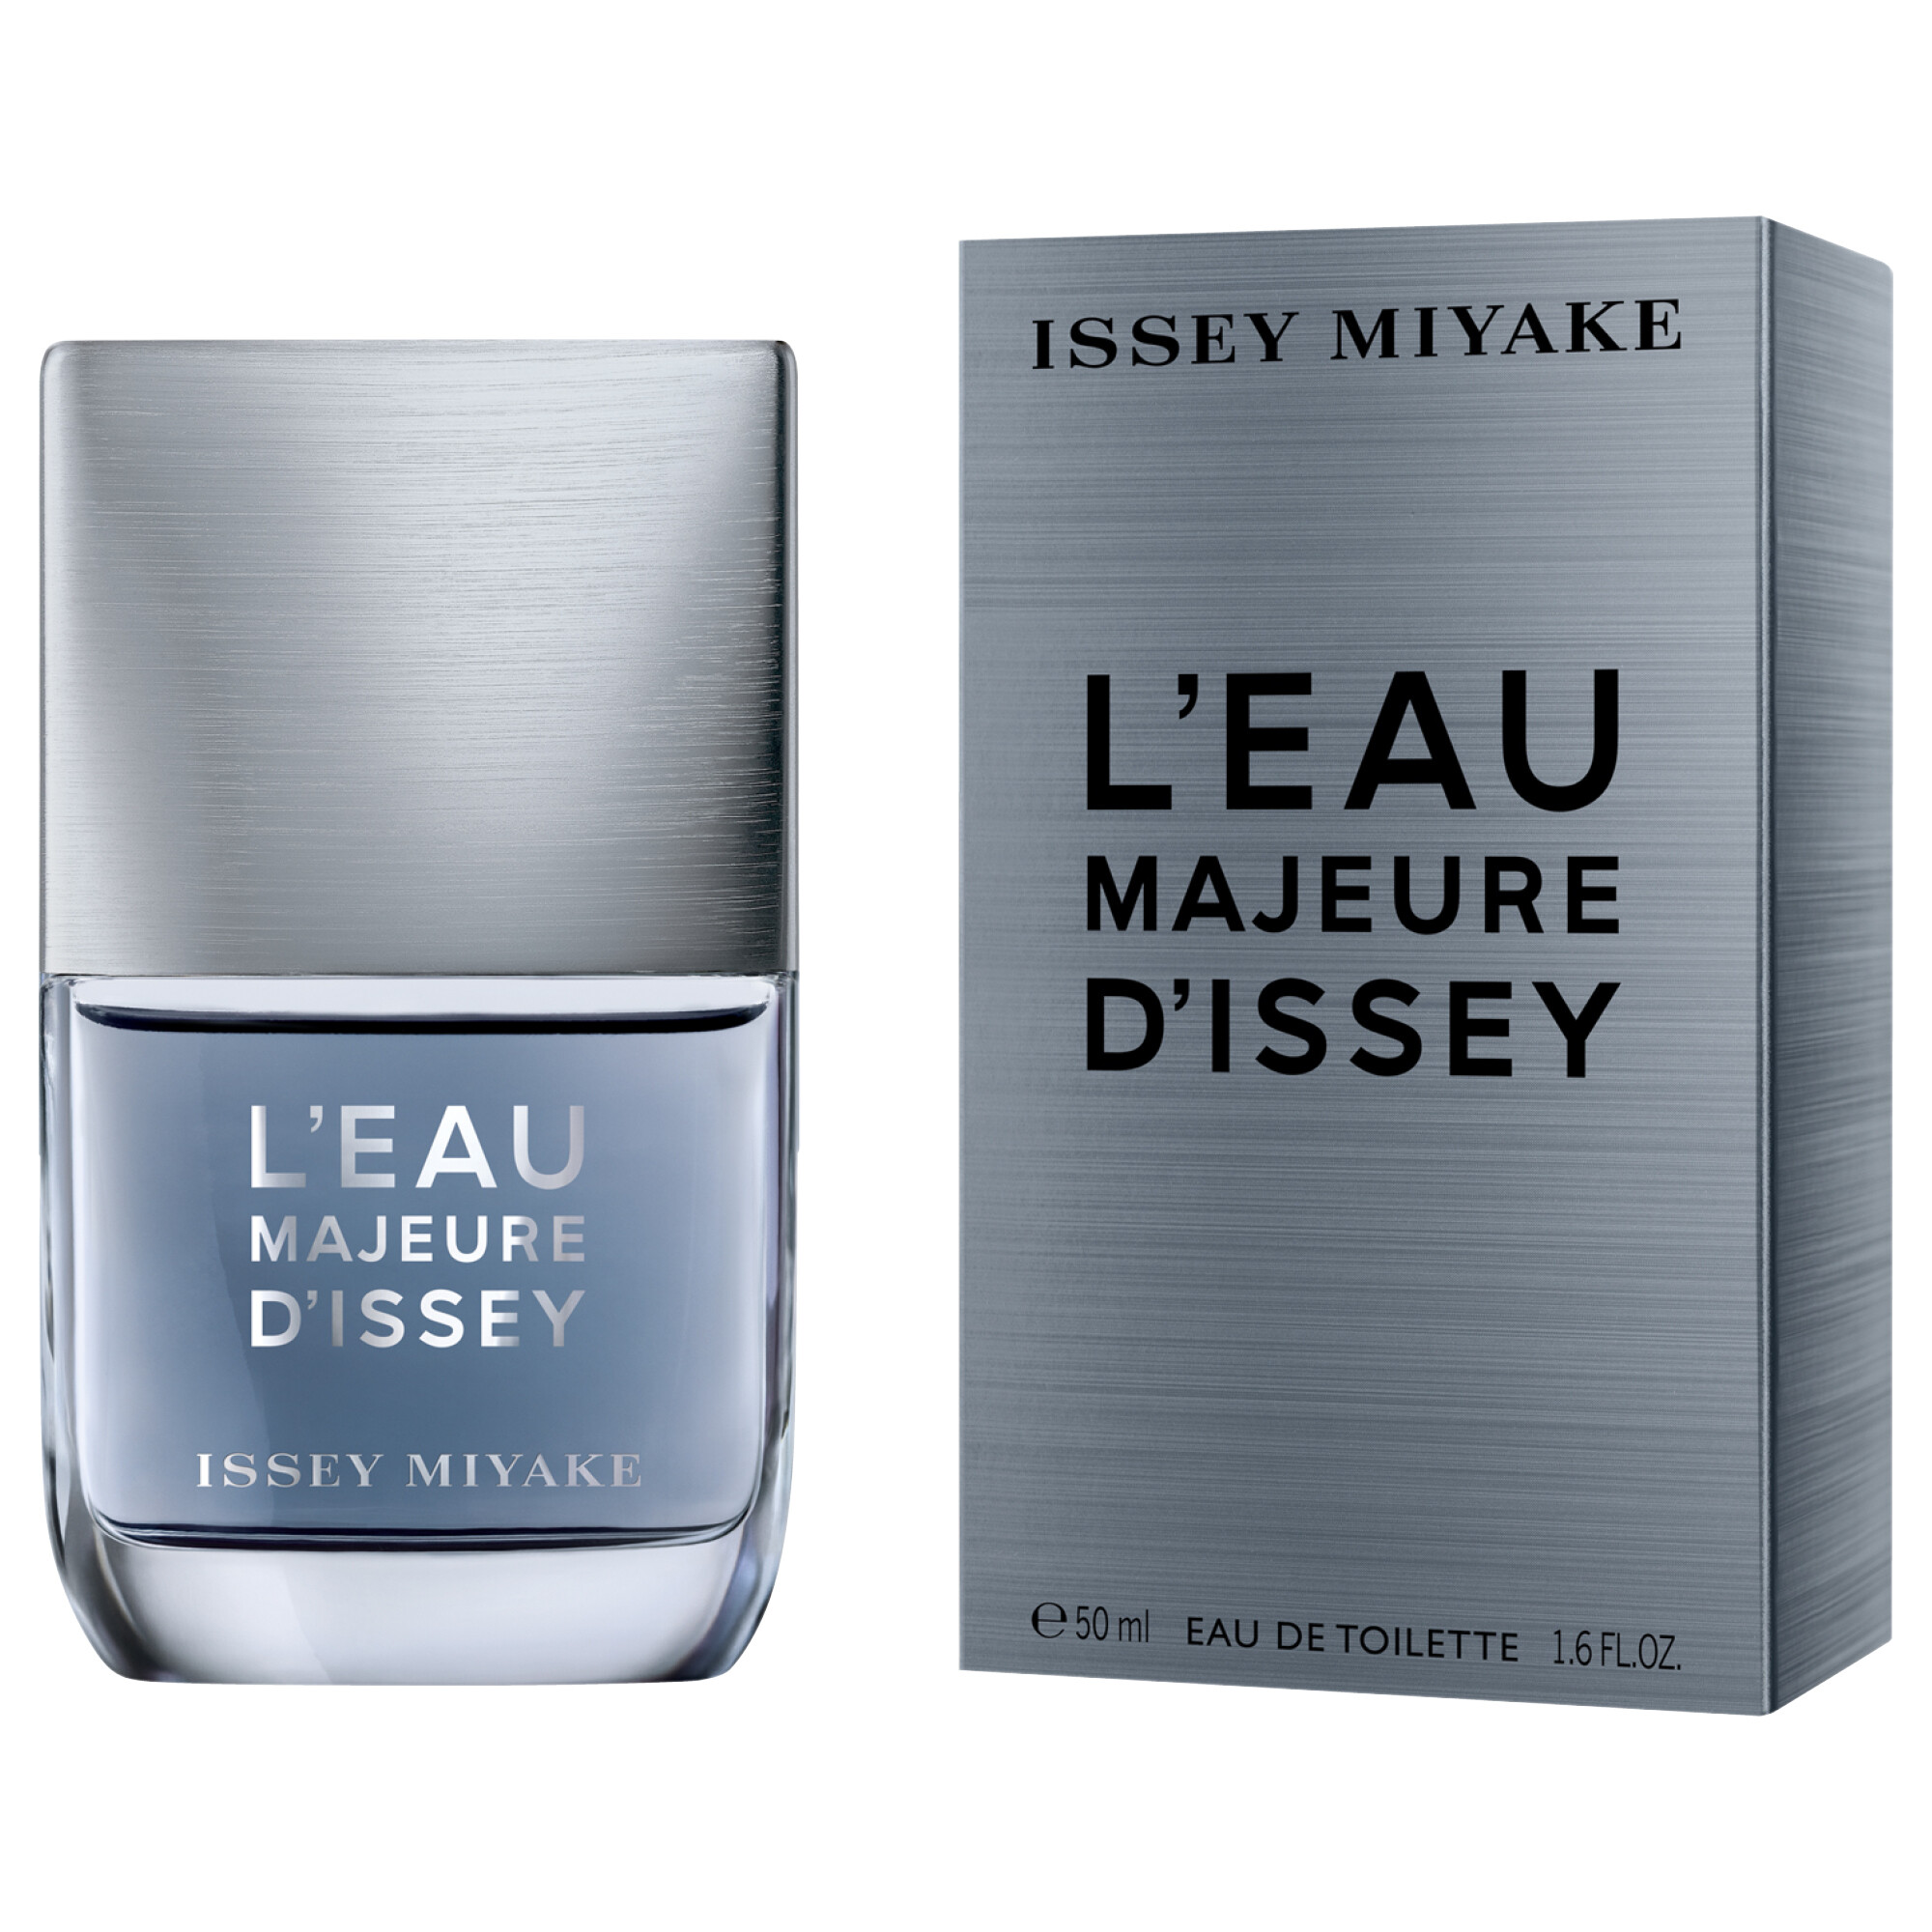 Issey Miyake Issey Miyake L'Eau Majeure d'Issey EDT 50ml kaufen